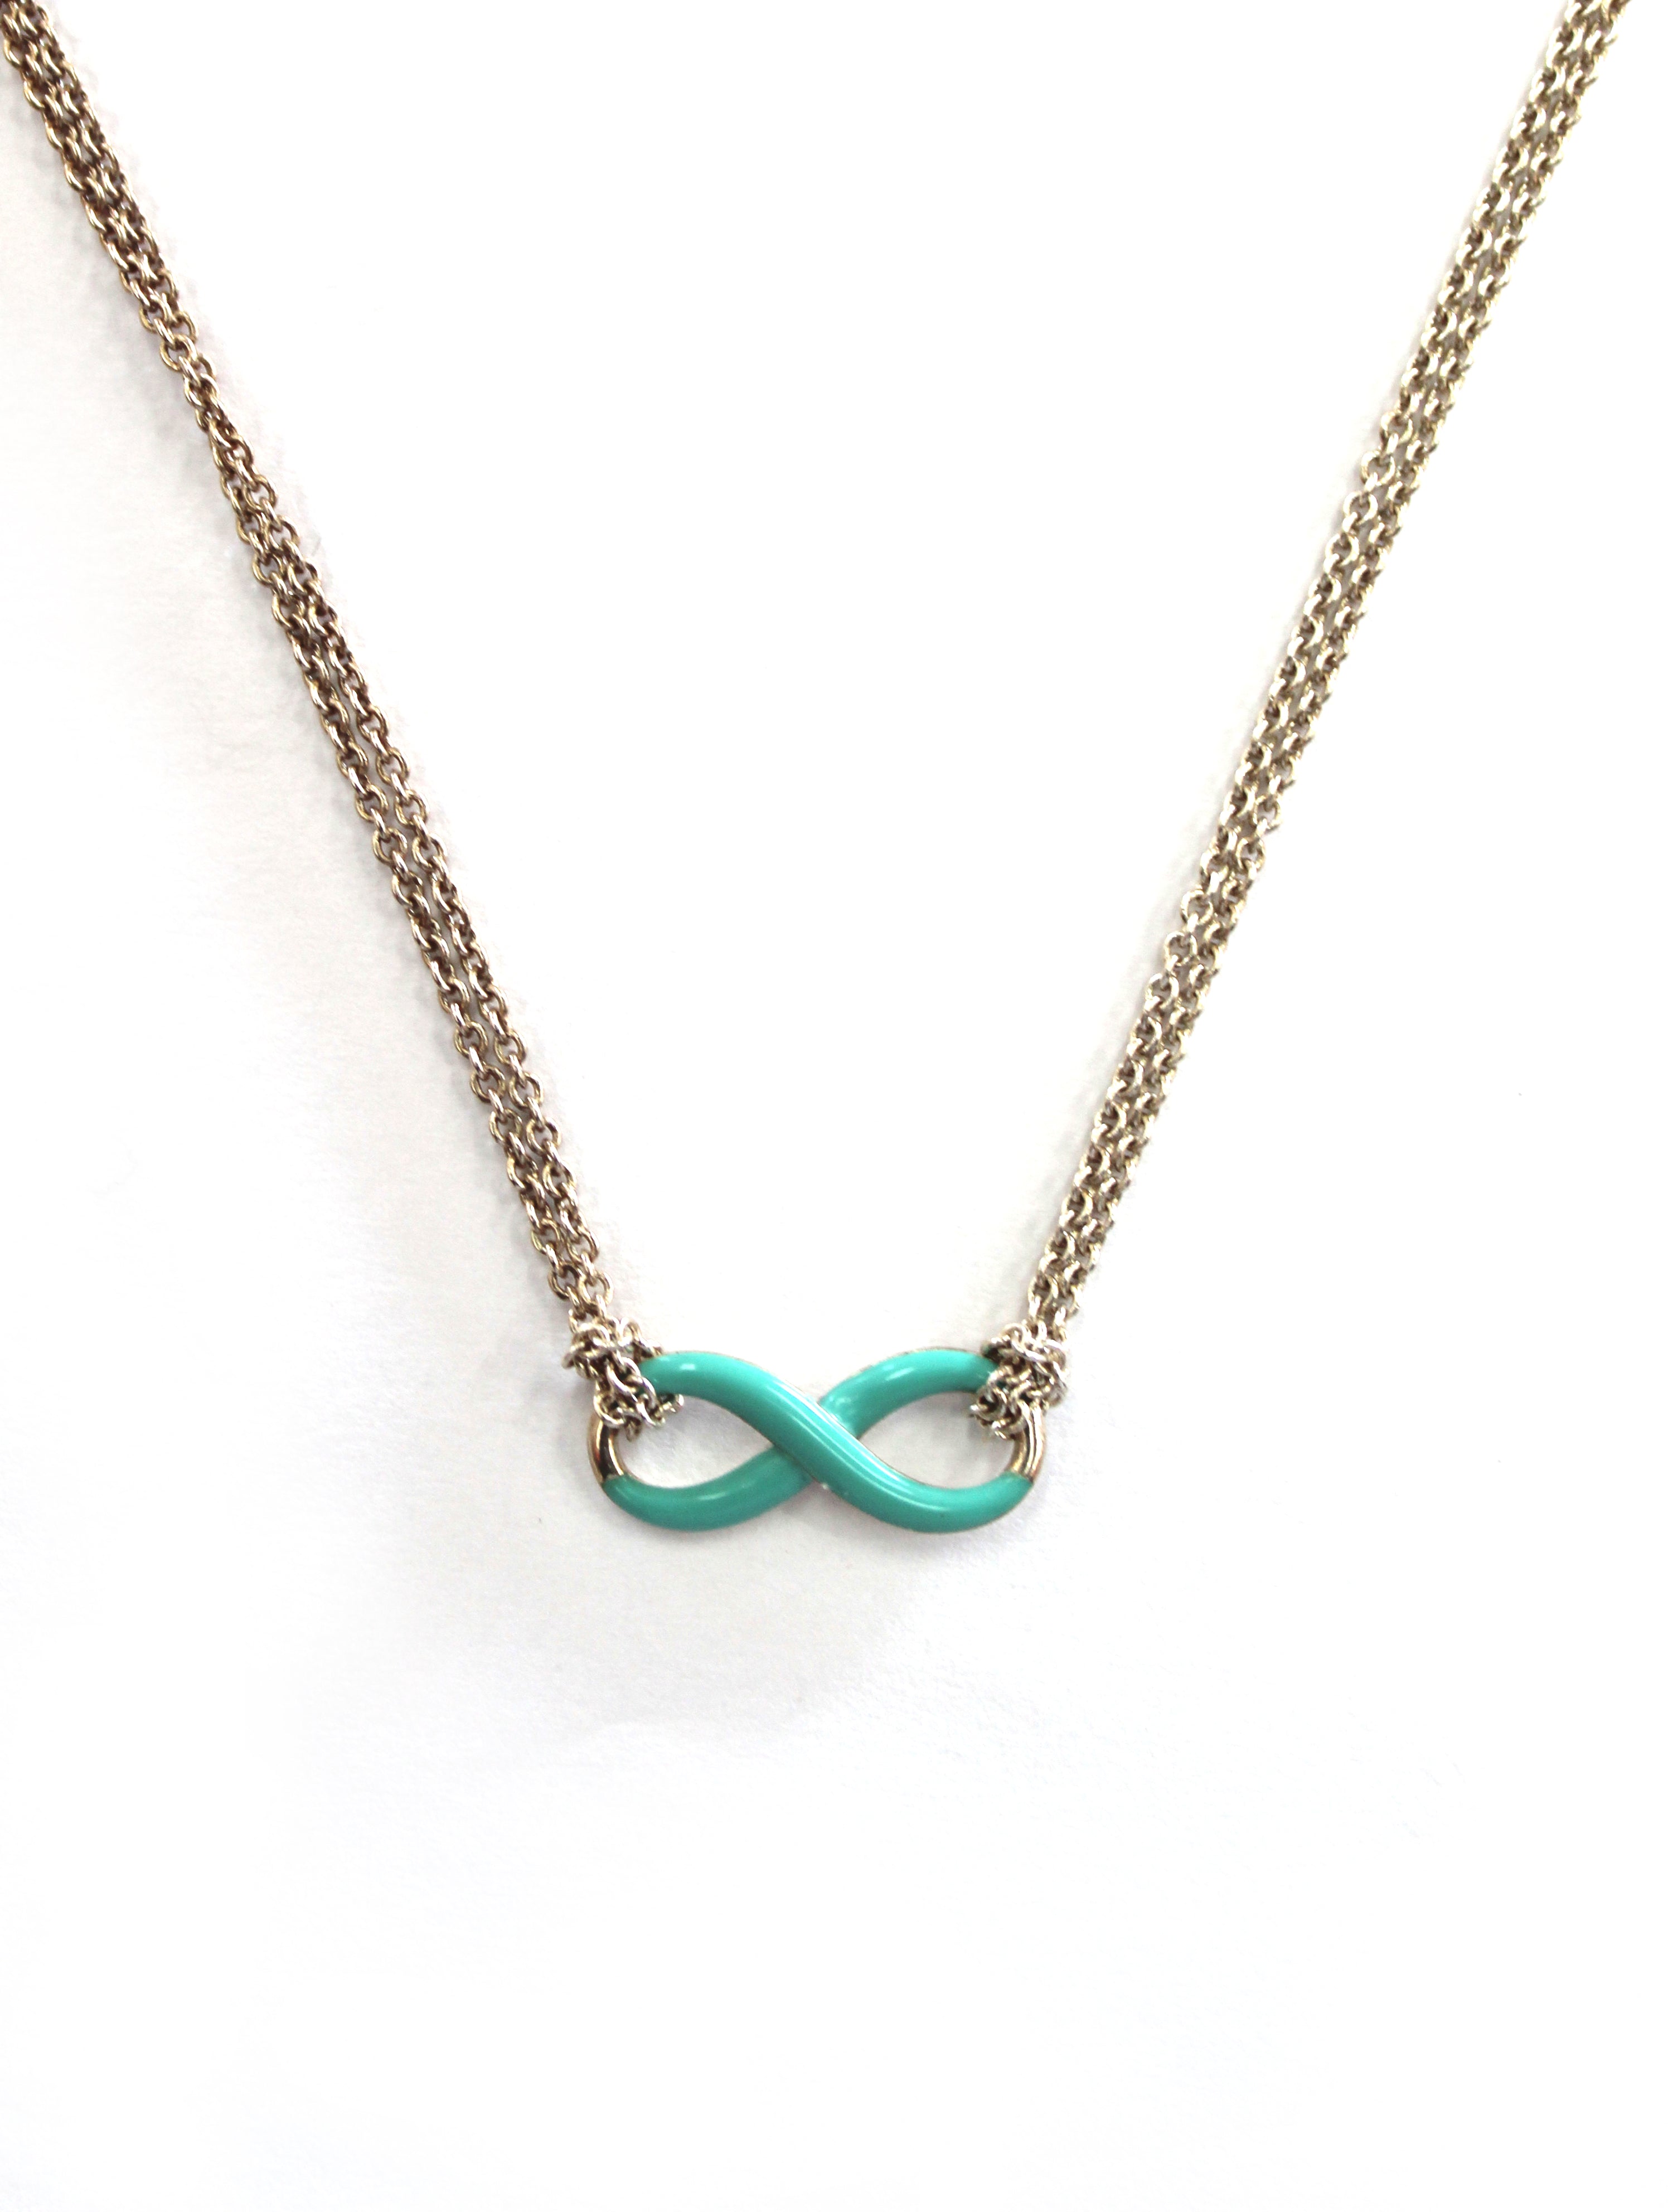 Authentic Tiffany & Co. Sterling Silver 1" Blue Infinity Necklace